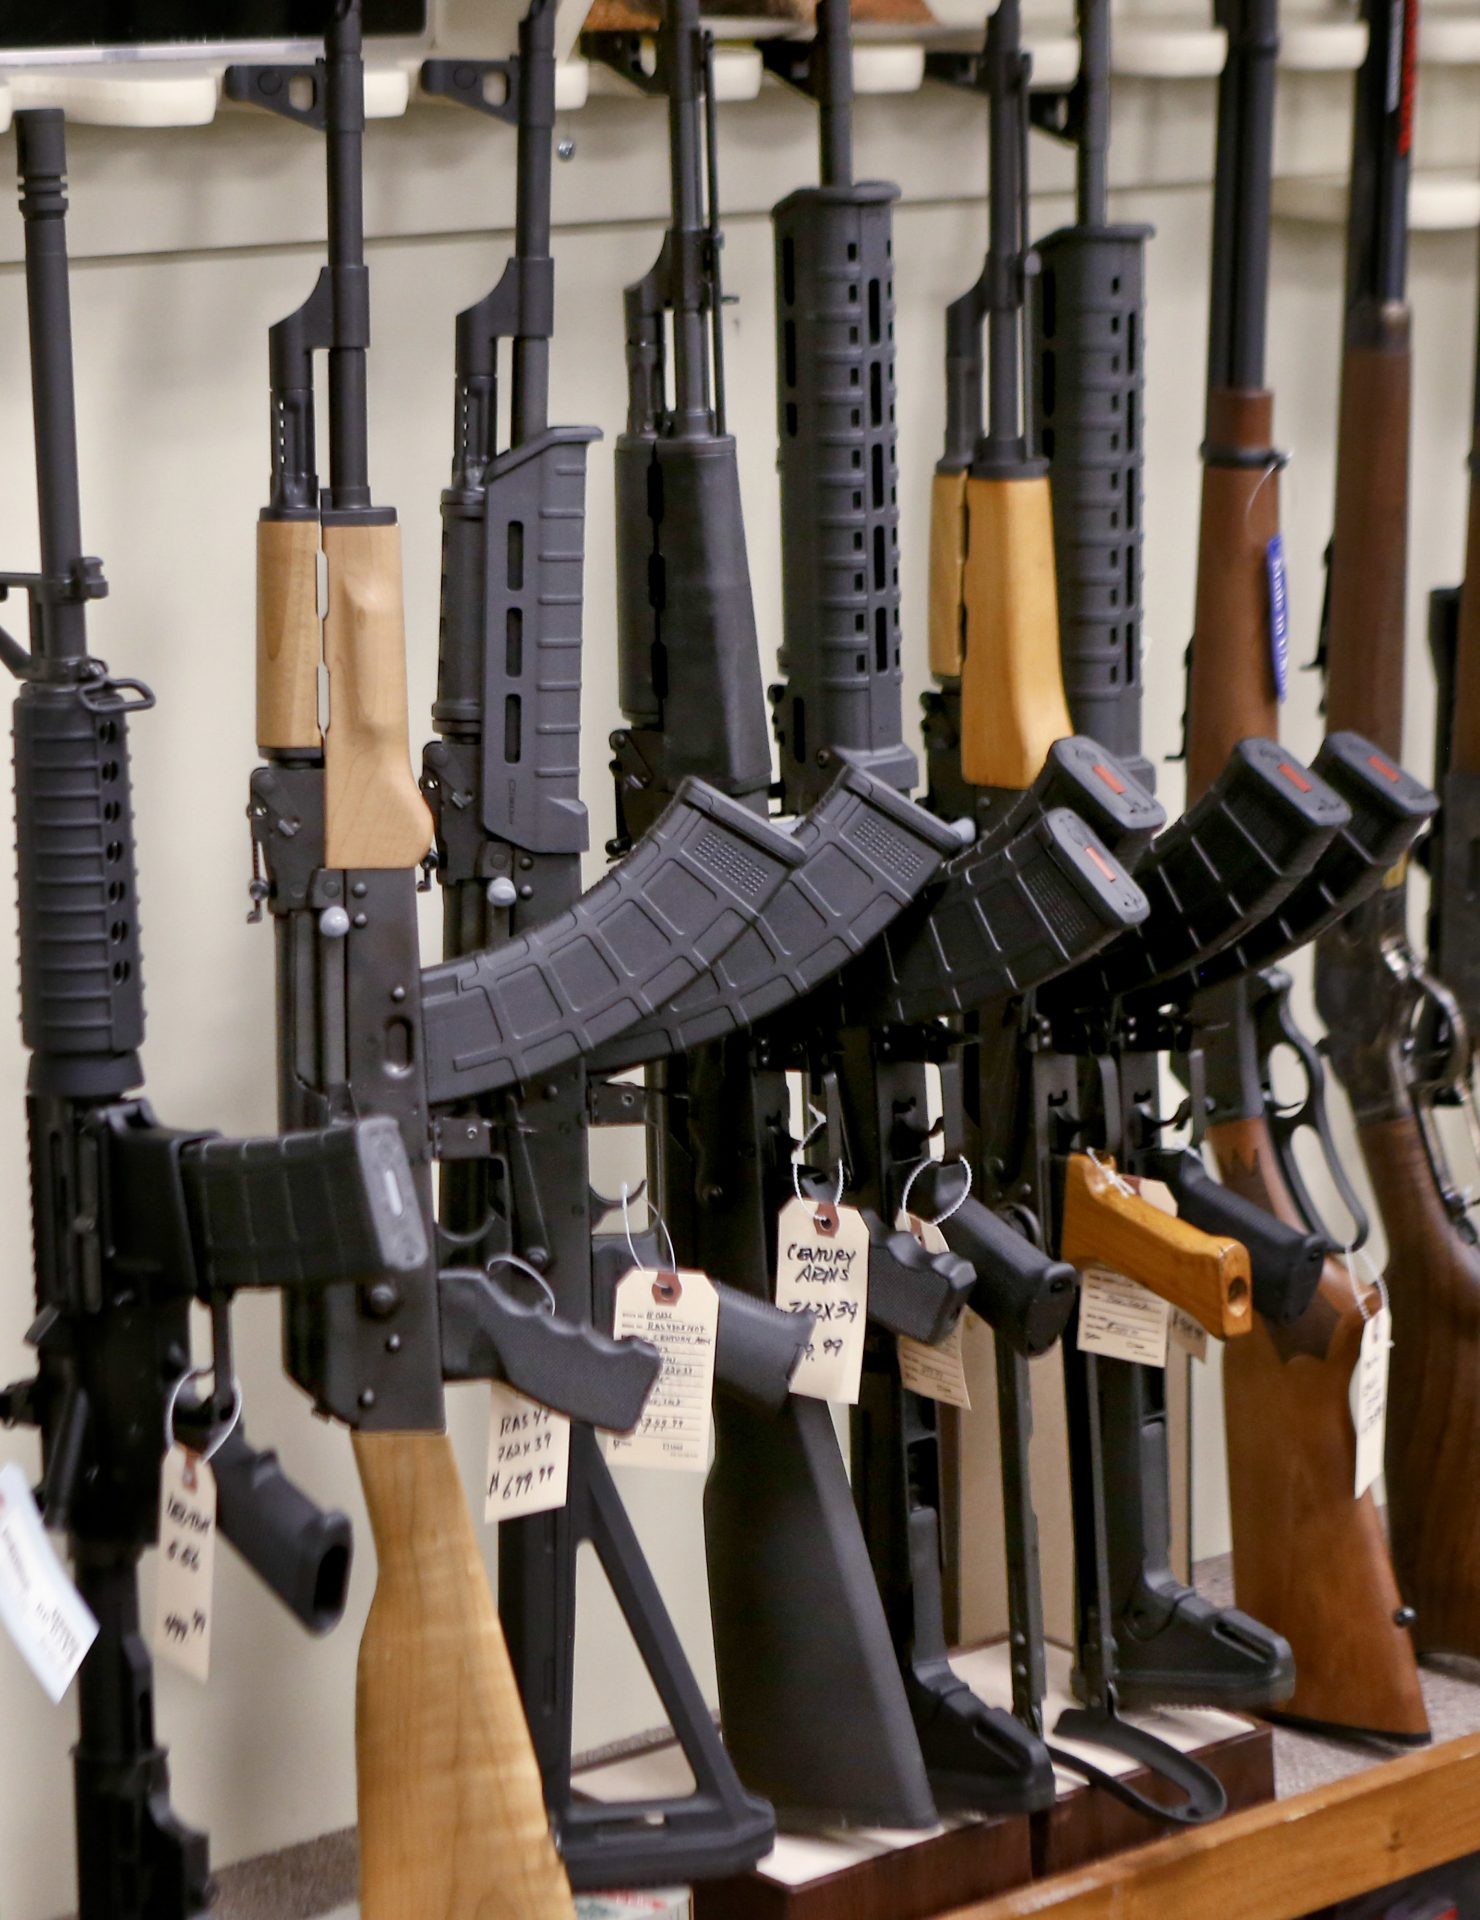 A portion of the rack displaying various models of semi-automatic sporting rifles is seen at Duke's Sport Shop in New Castle, Pa. on Thursday, March 1, 2018.